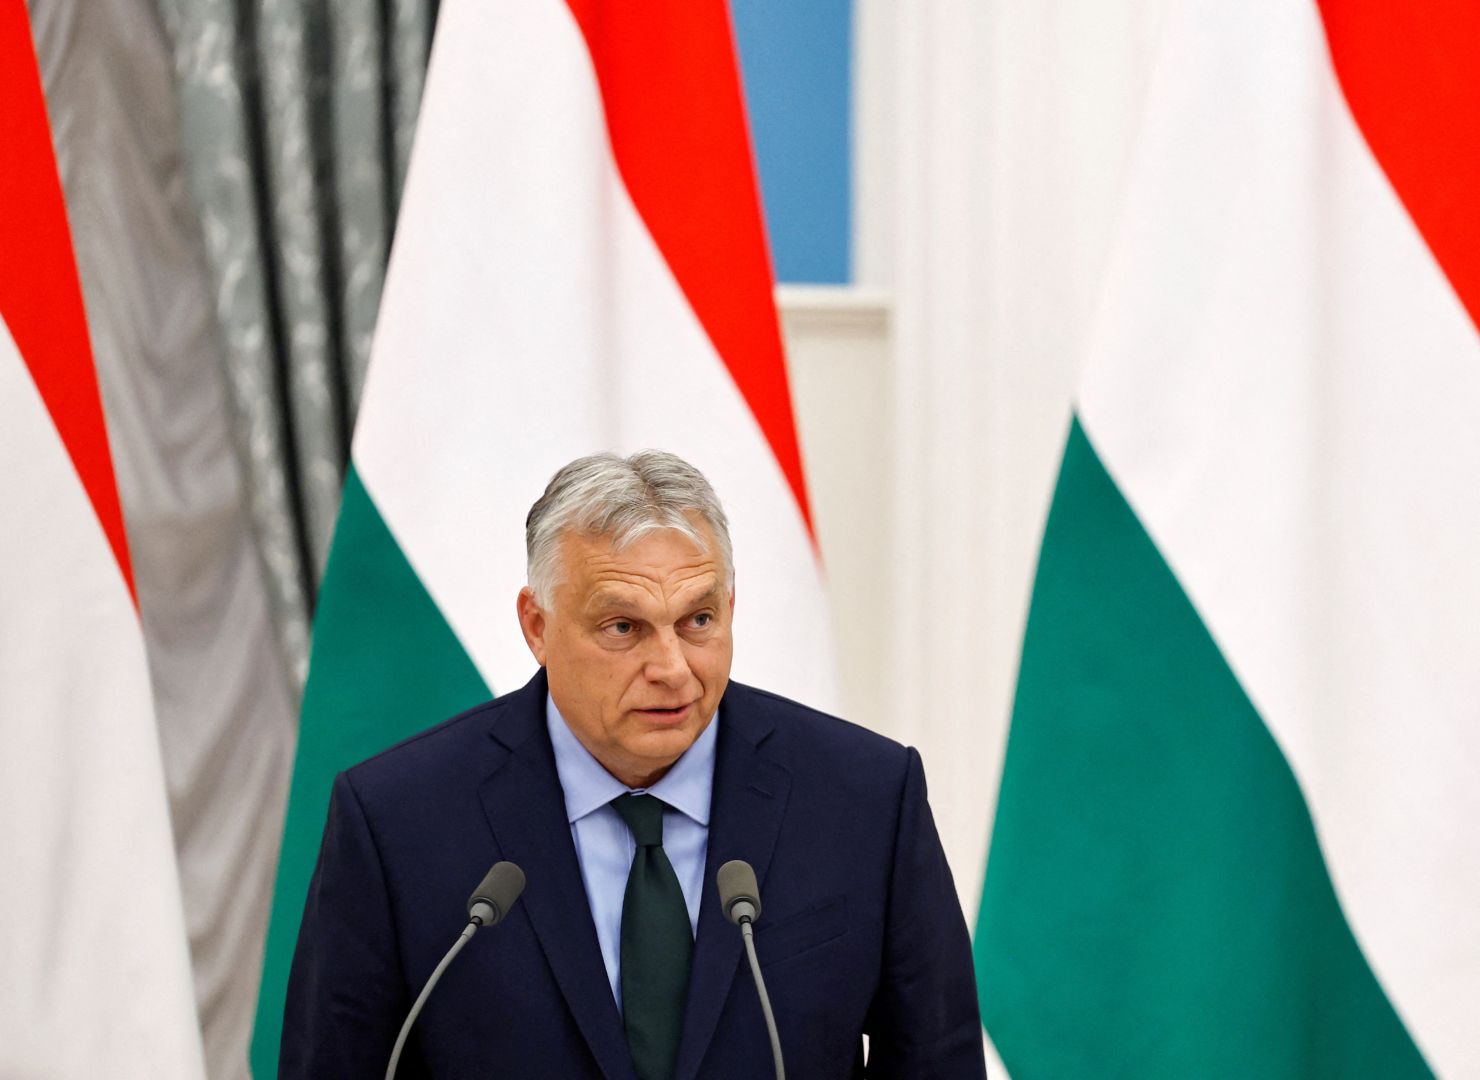 Hungarian PM commends President Erdogan's role as mediator in Russia-Ukraine crisis